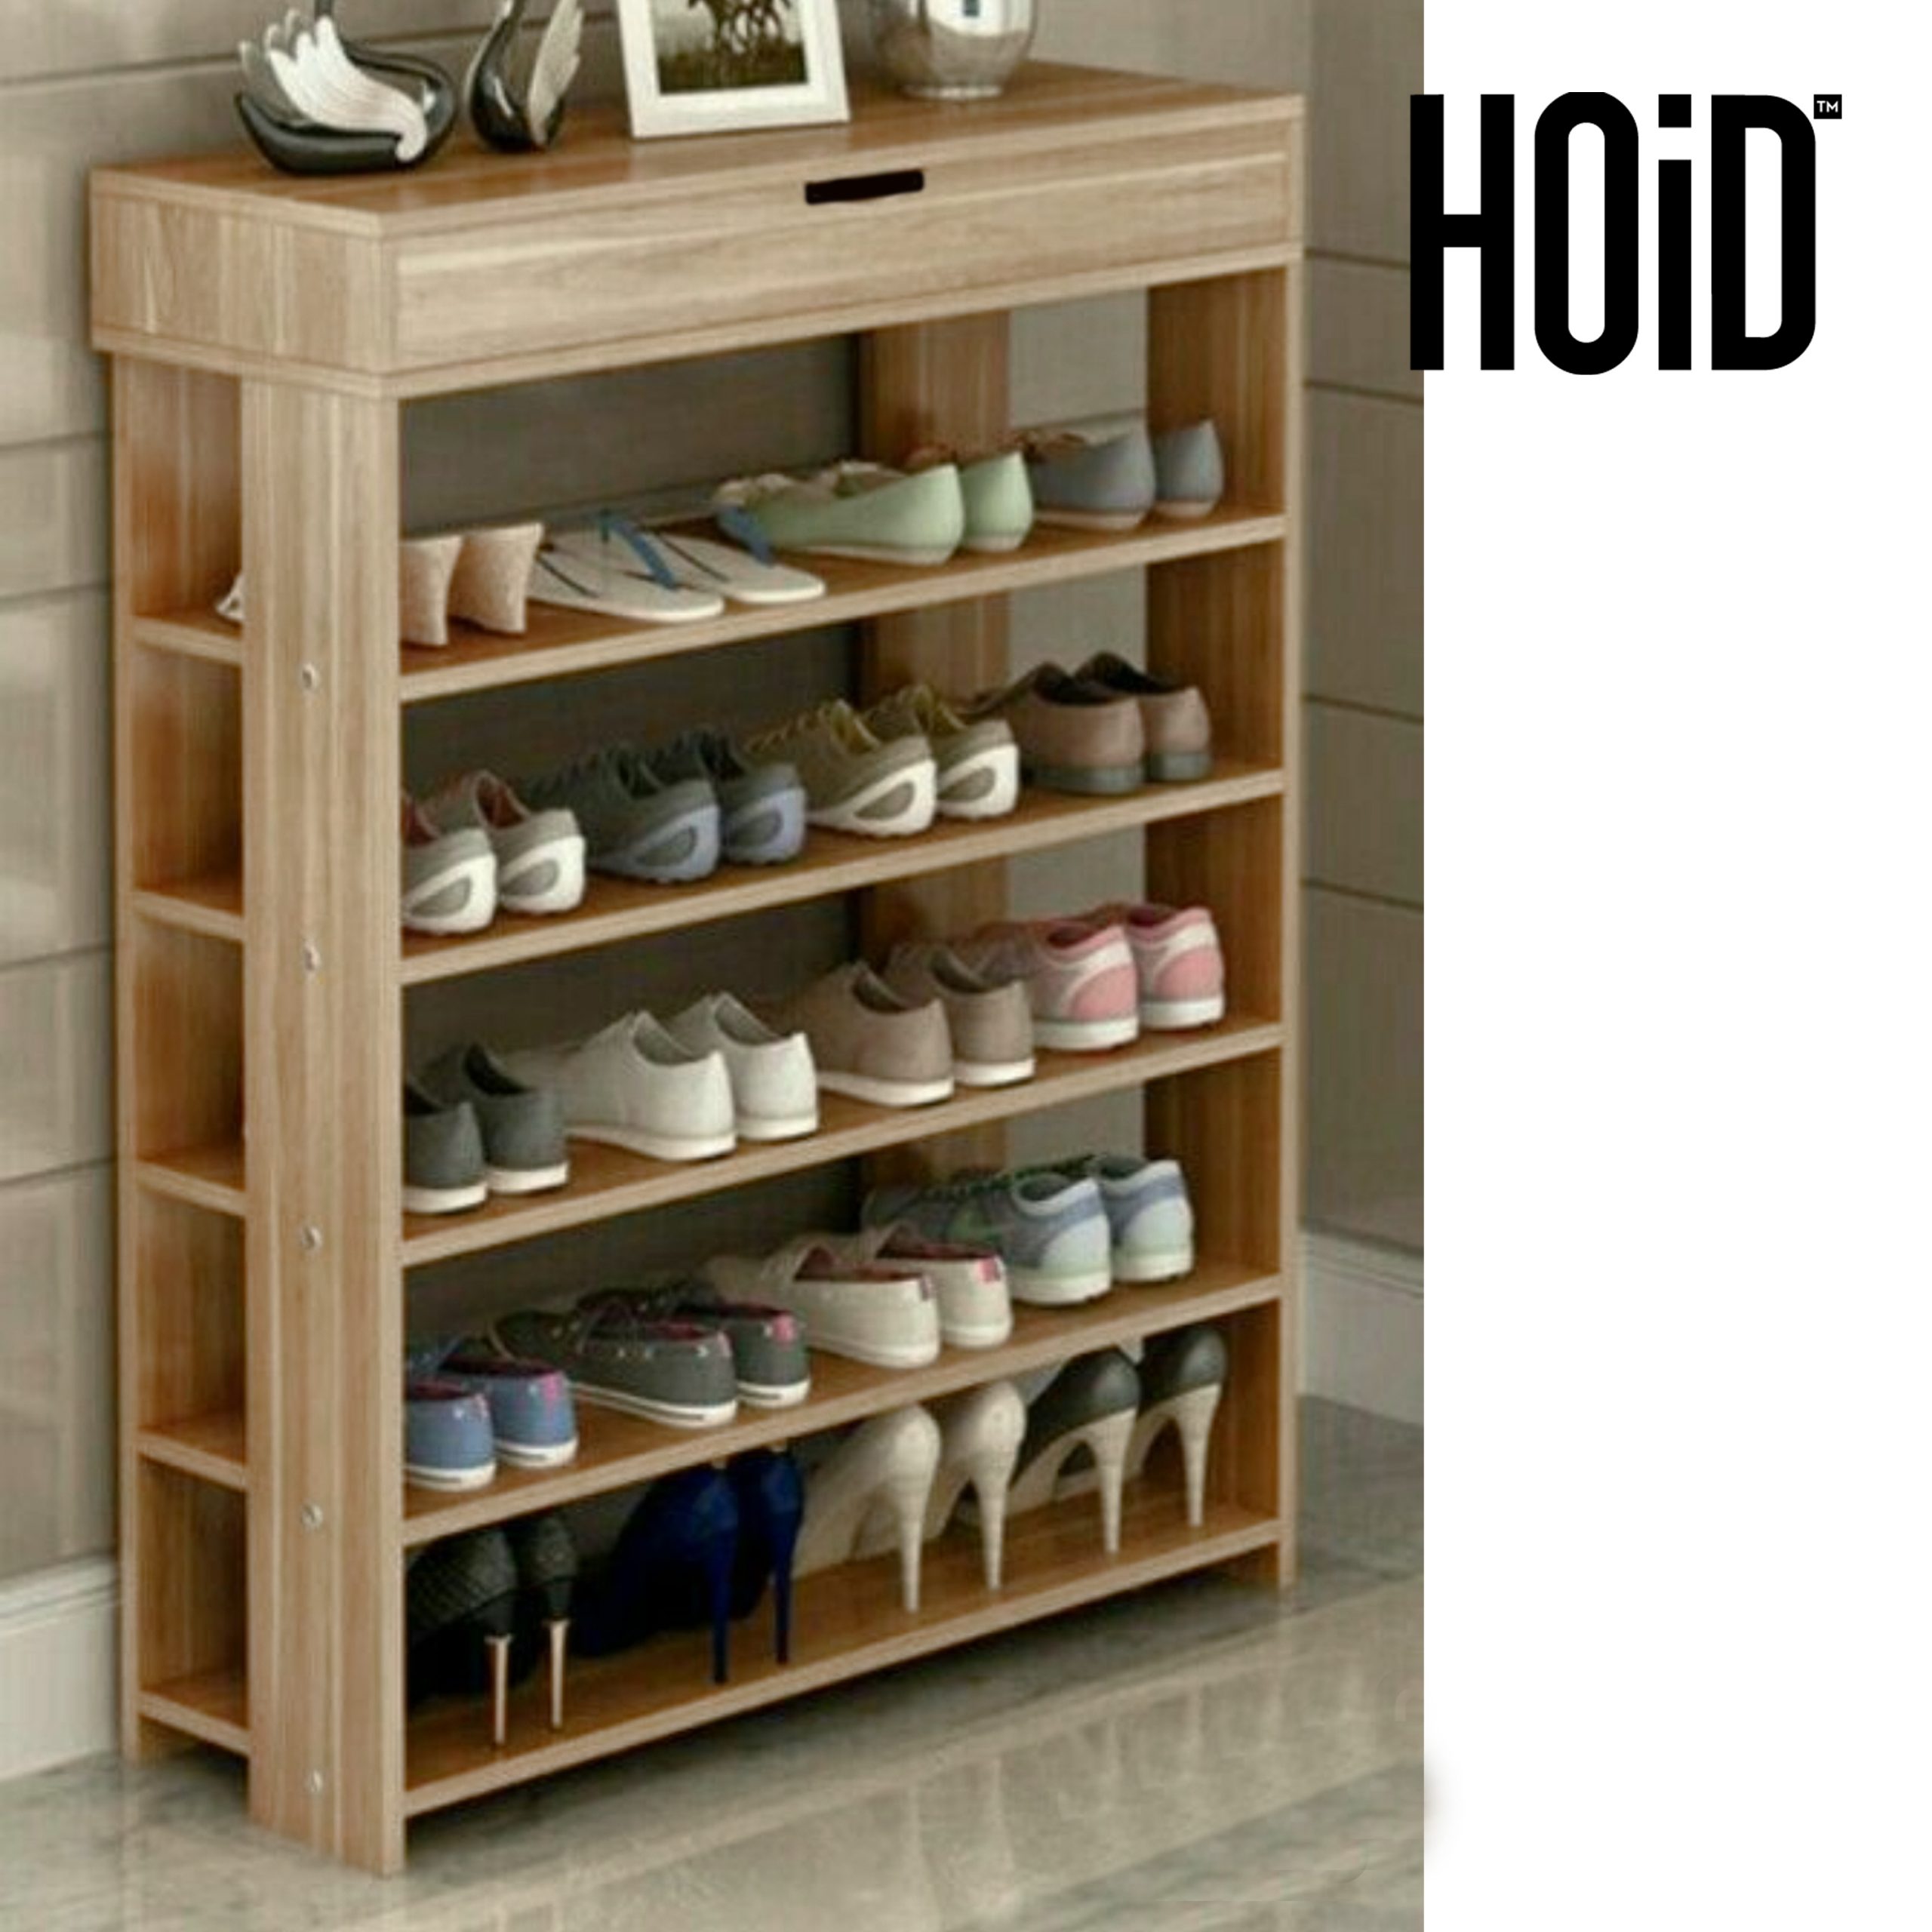 Minimalist Images Of Shoe Racks Cabinets with Best Design